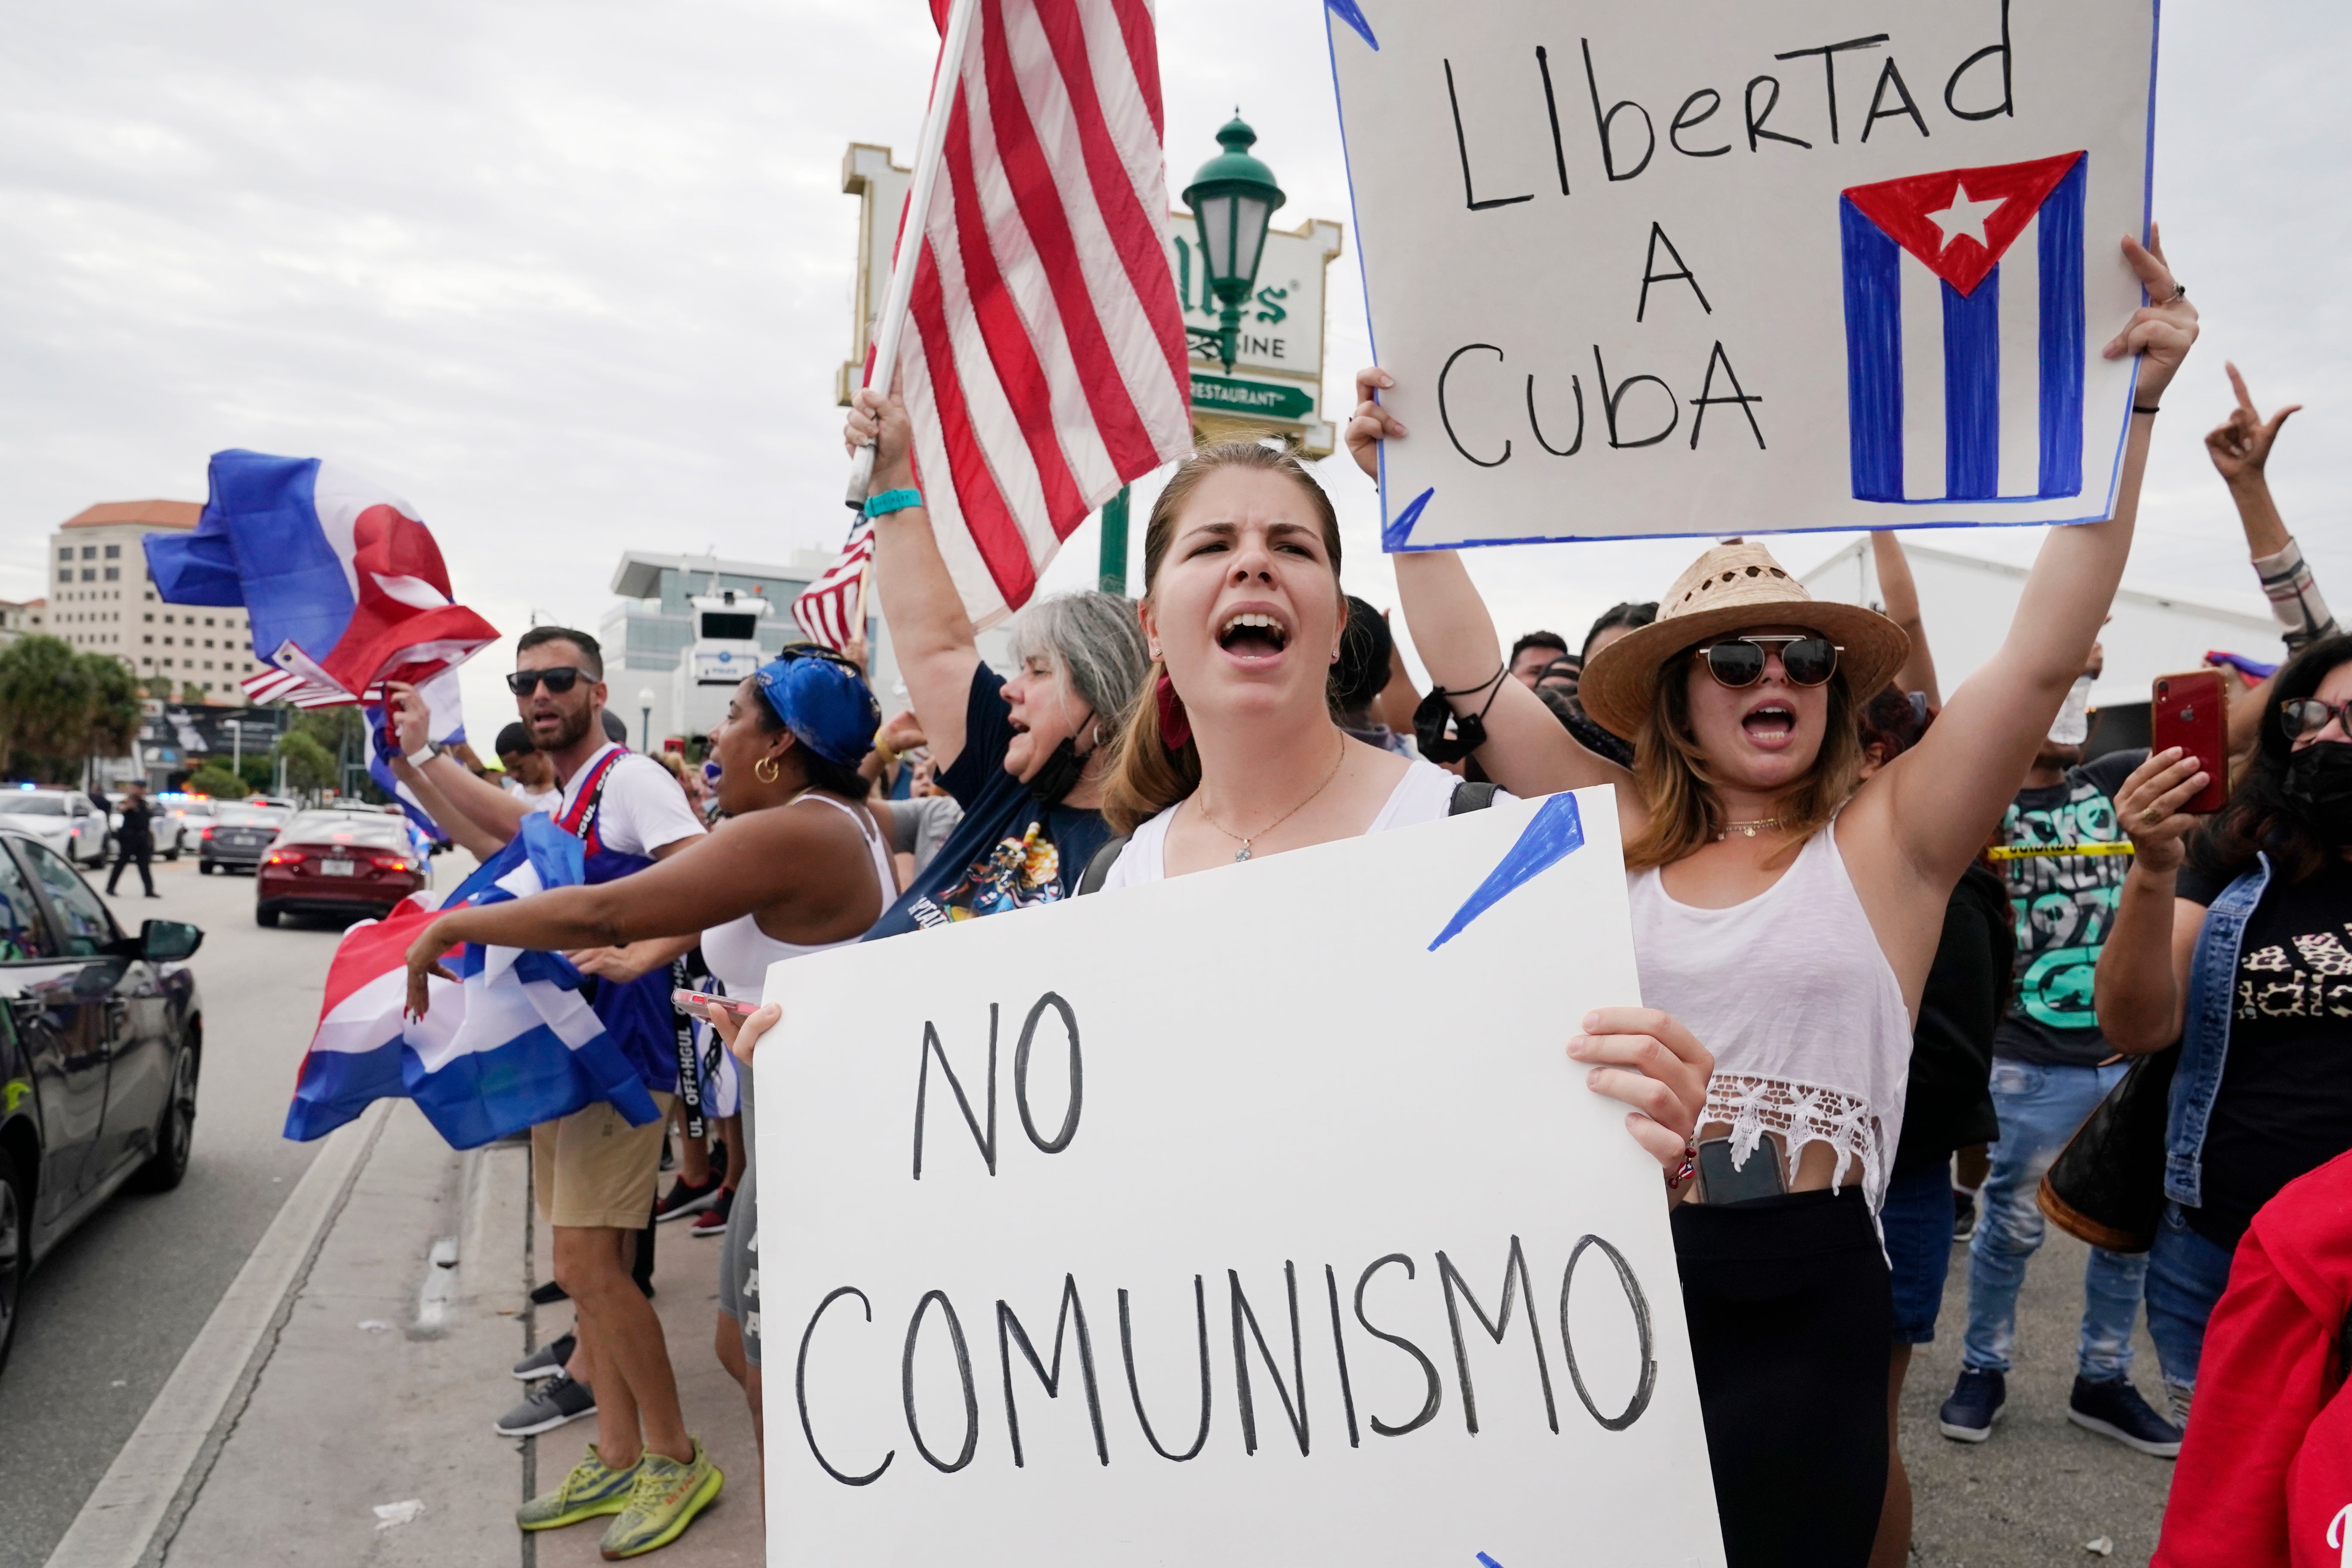 Cubans in Miami talk of boating to island to back protests Instagram